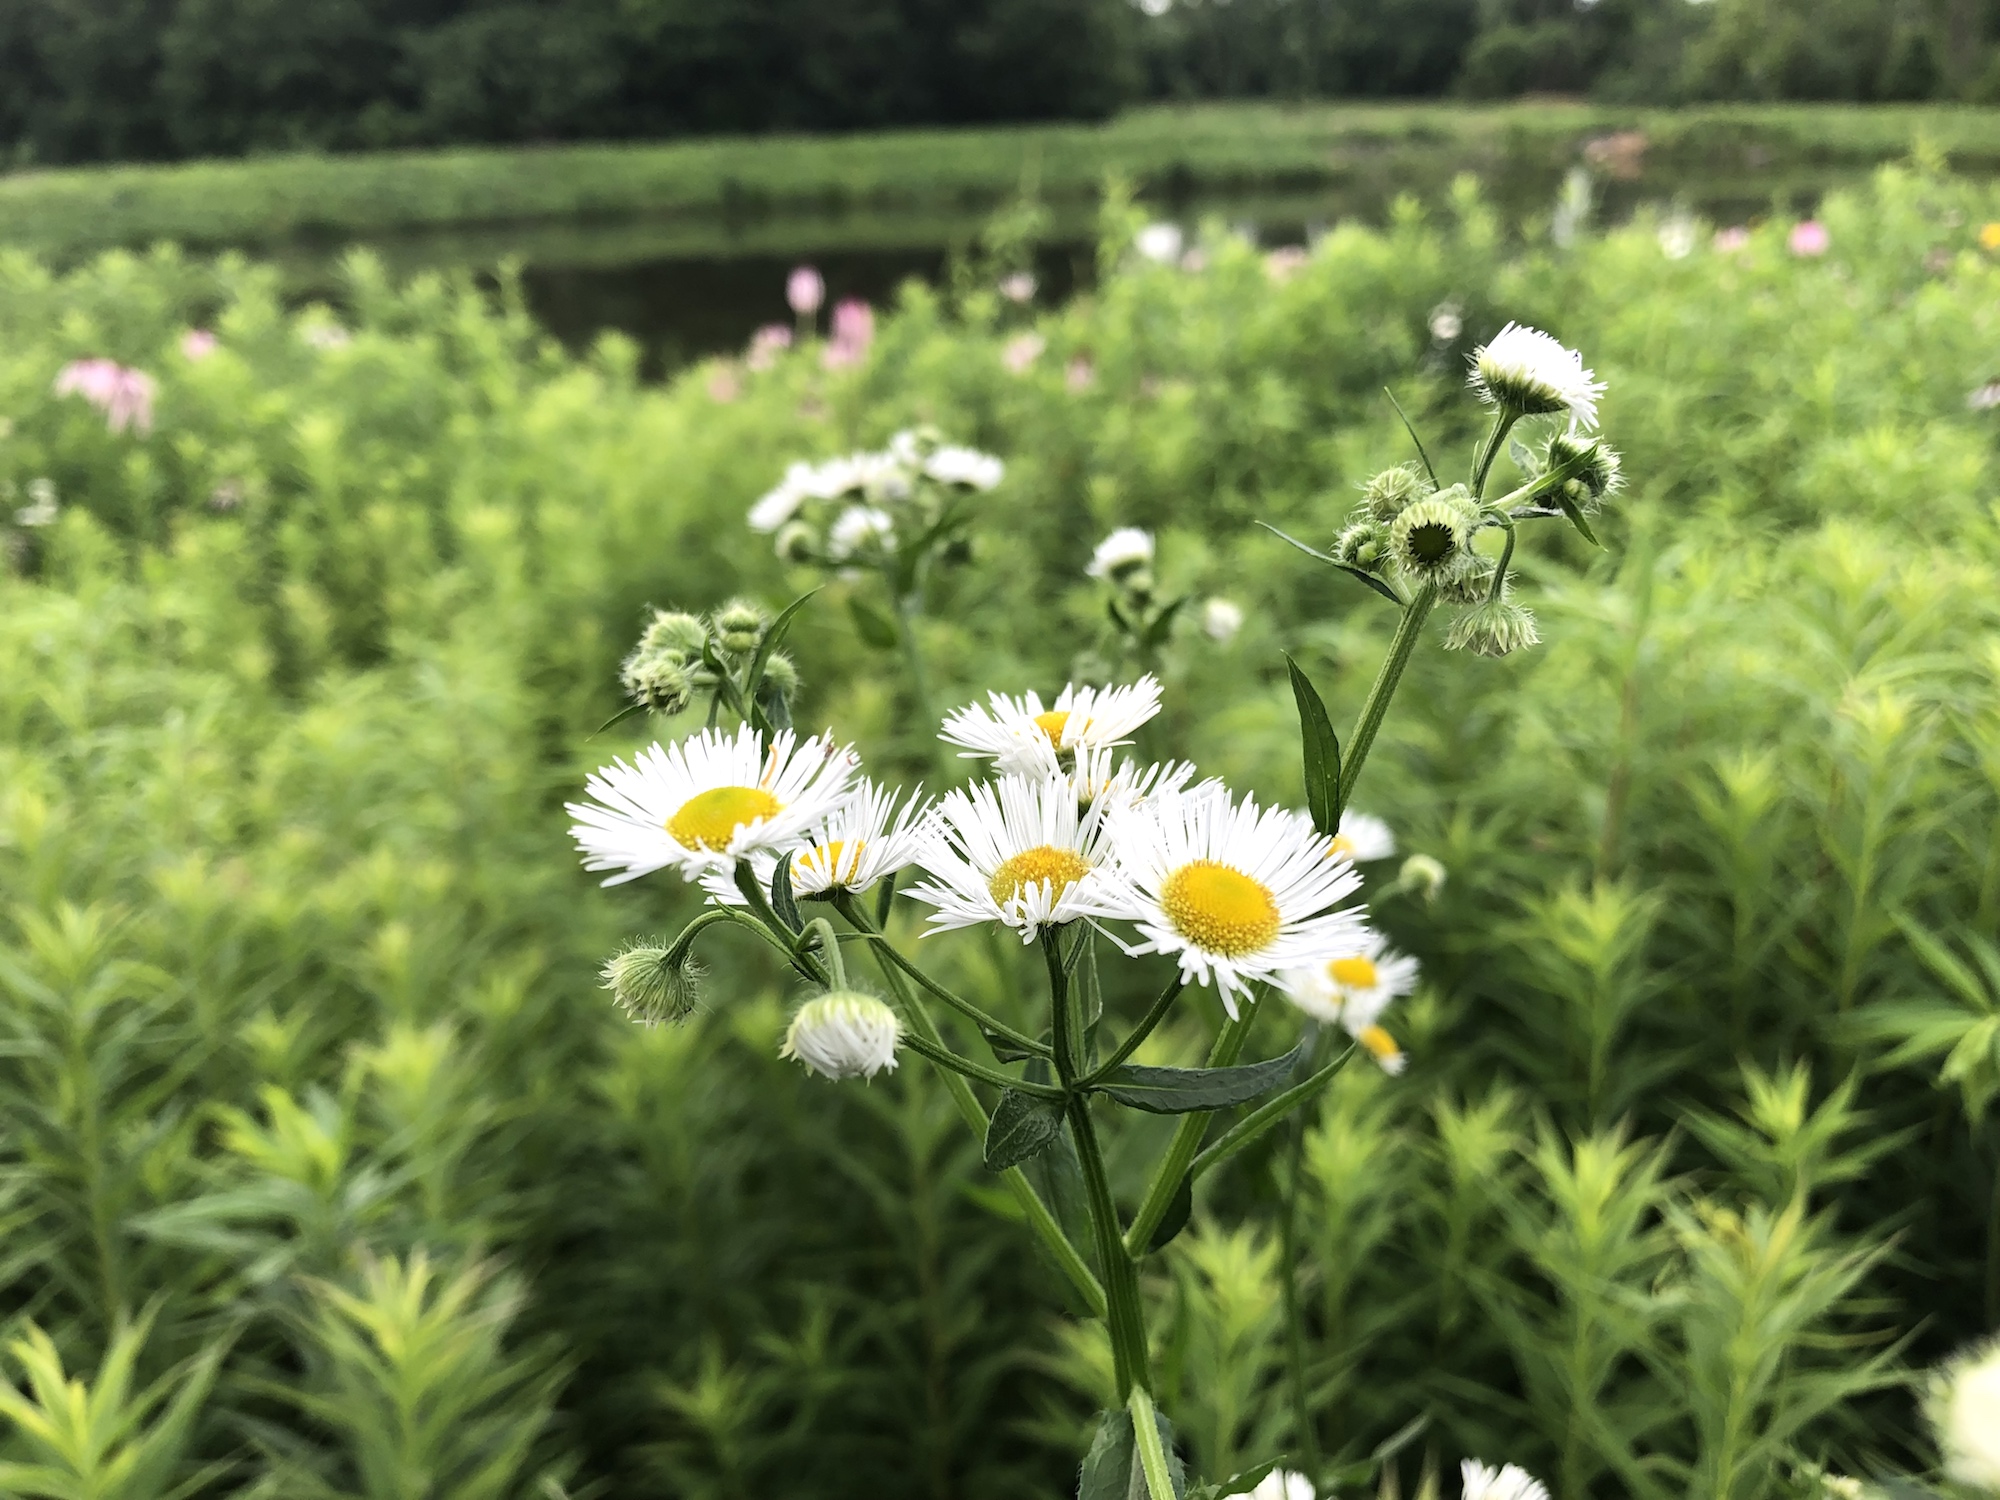 Fleabane on bank of retaining pond at the corner of Manitou Way and Nakoma Road in Madison, Wisconsin on July 1, 2019.